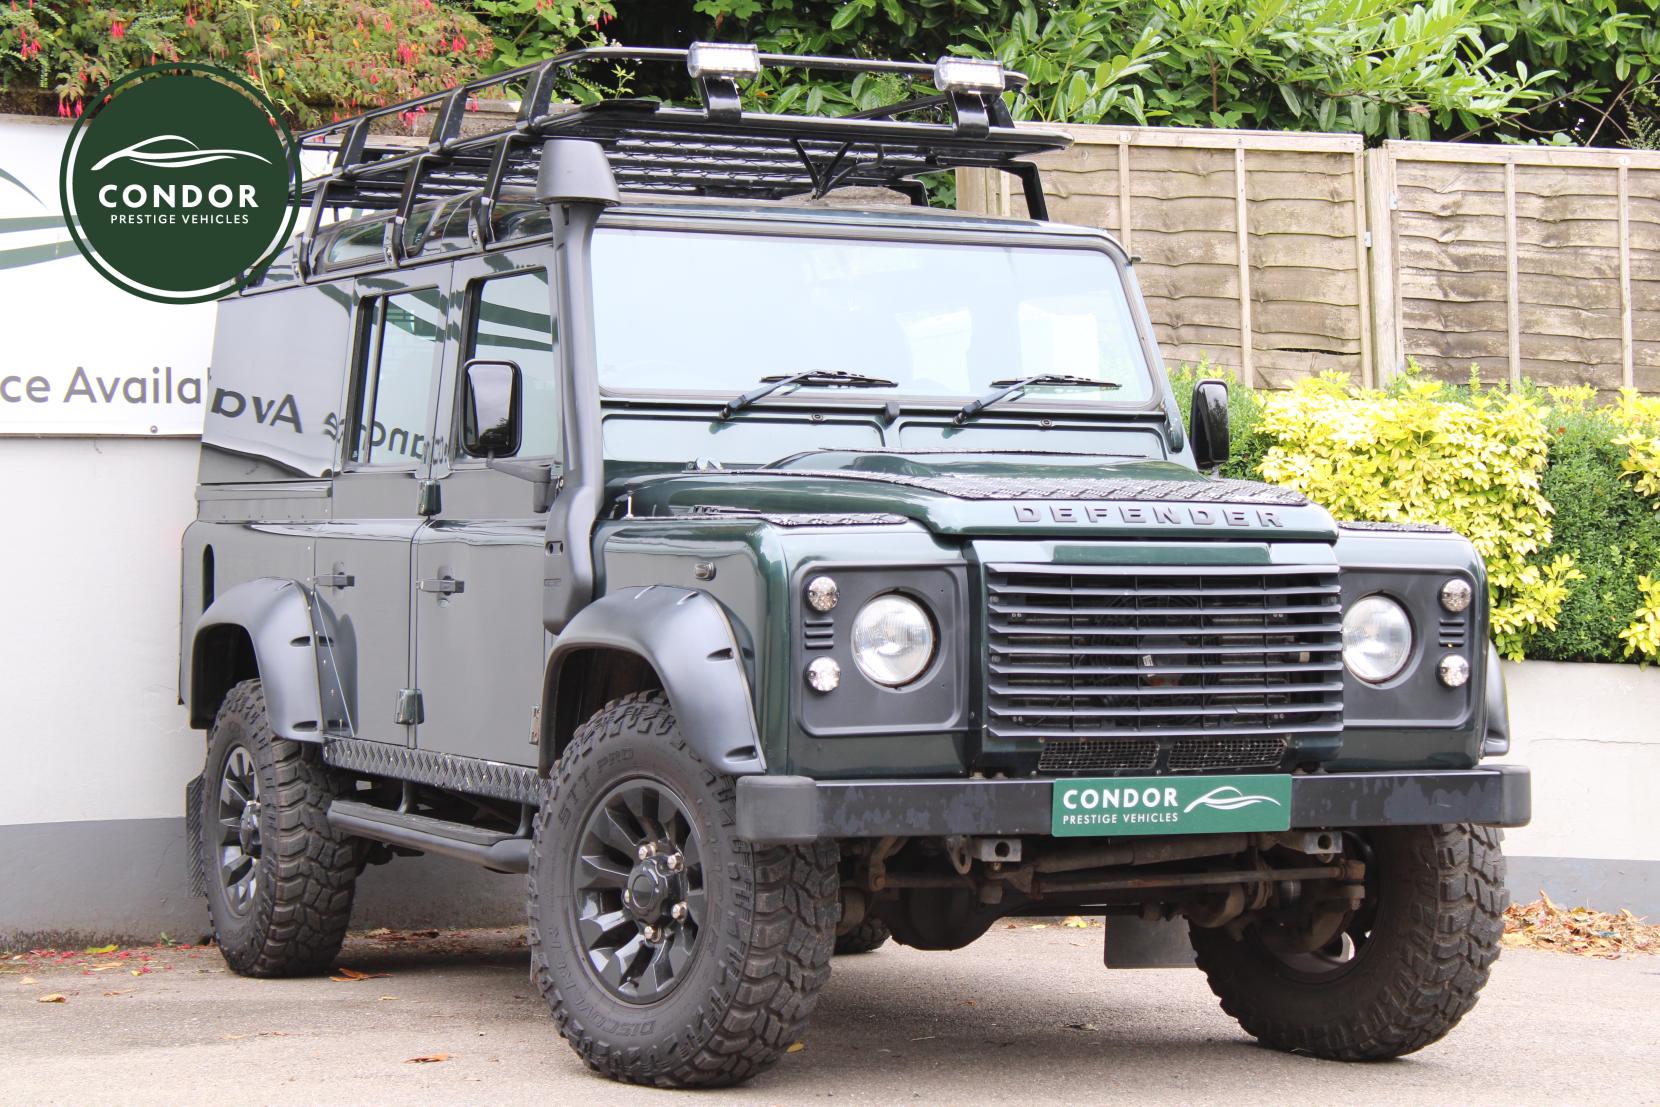 Land Rover Defender 110 2.4 TDCi XS Utility Wagon Double Cab 5dr Diesel Manual 4WD MWB Euro 4 (122 bhp)